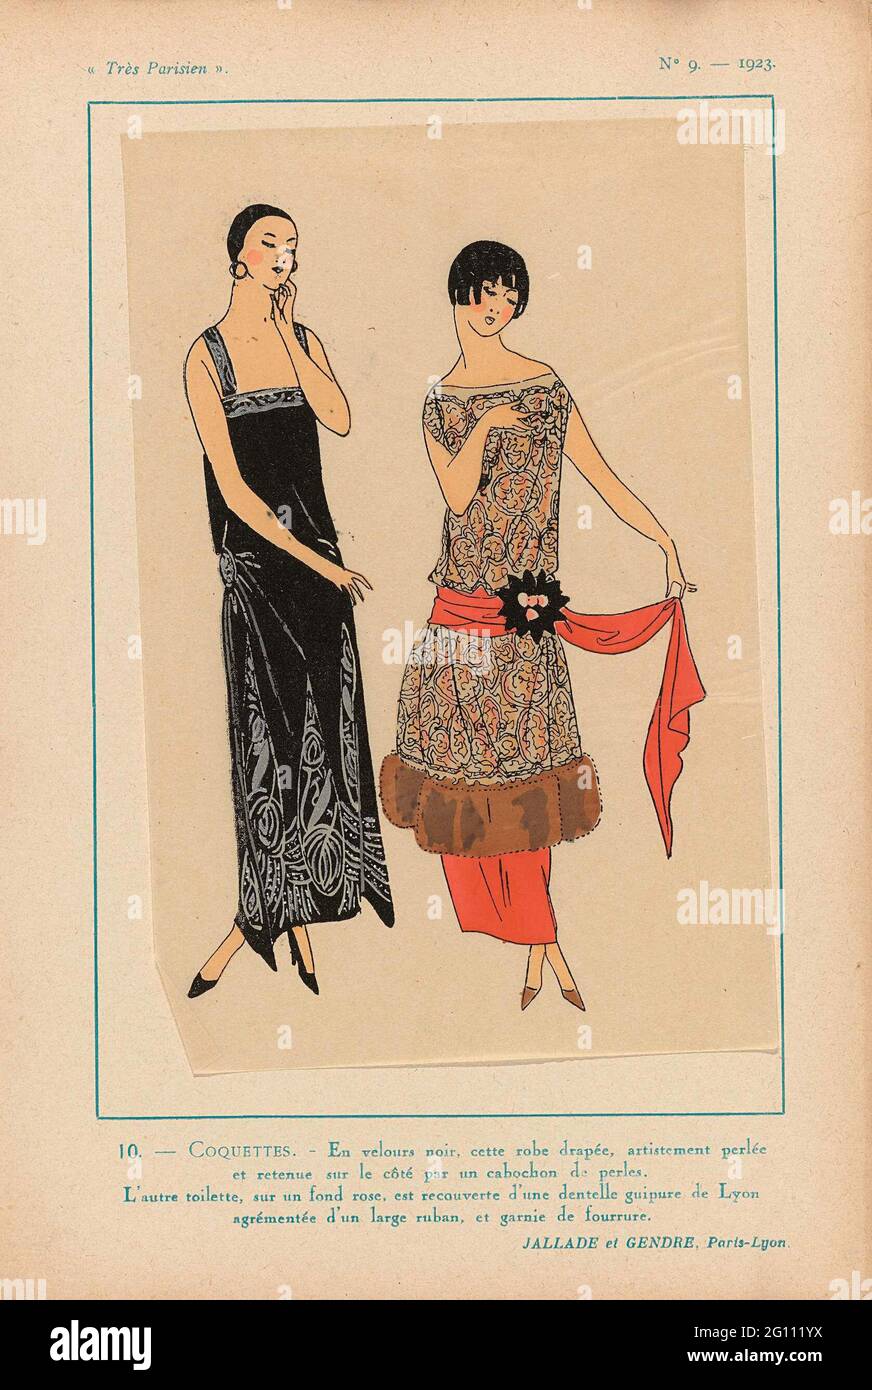 Très Parisien, 1923, No 9: 10 - Coquettes. - and Velor Noir, Cette Robe  Drapée, .... Draped evening dress made of black velvet decorated with  beads; Plated on the side by a '